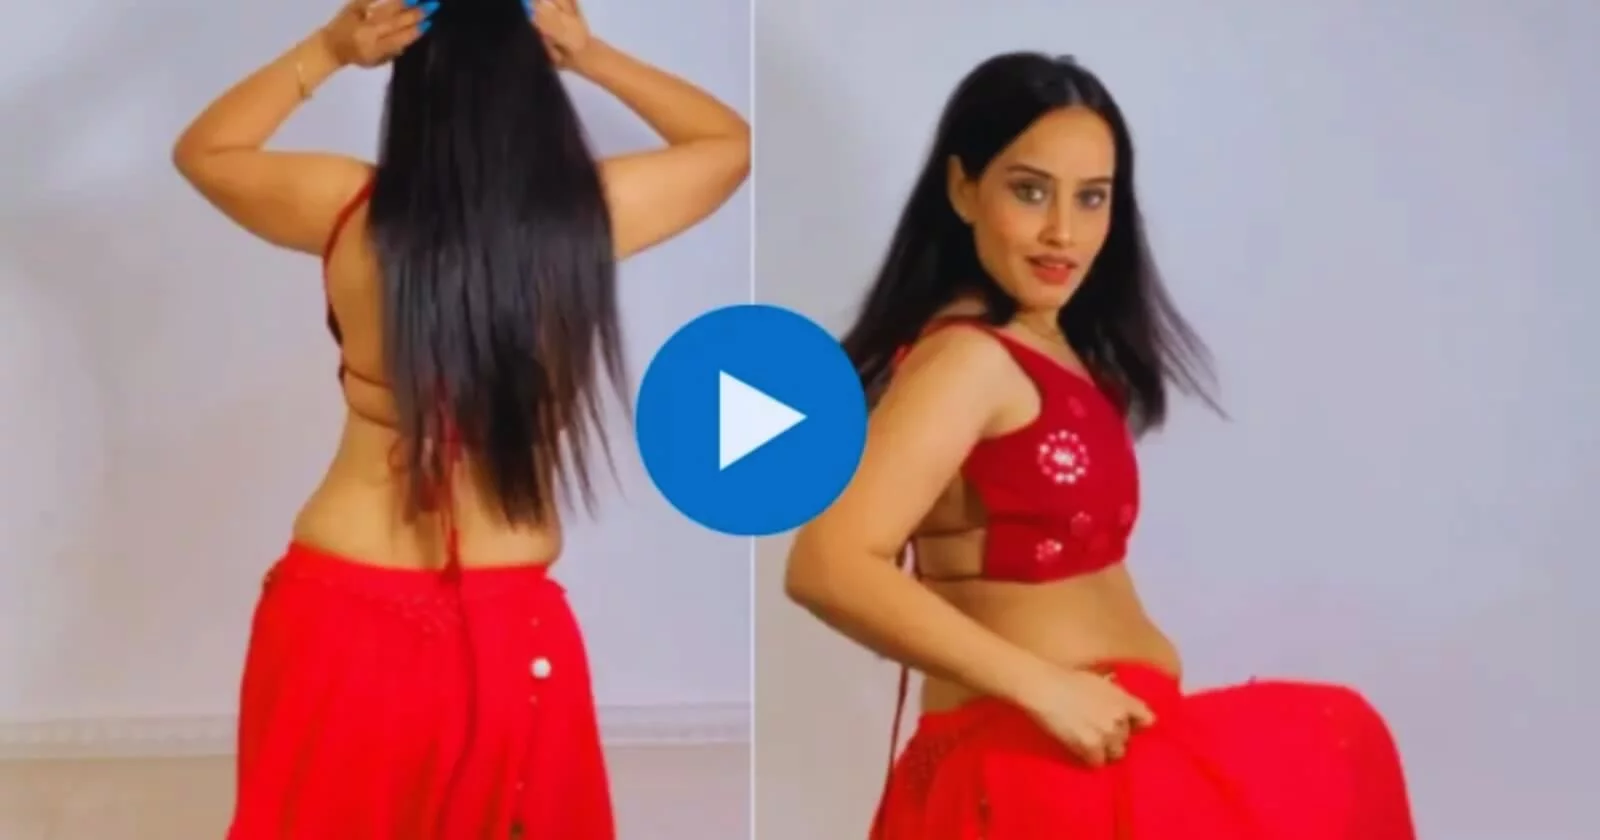 Girl Belly Dance Video Goes Viral